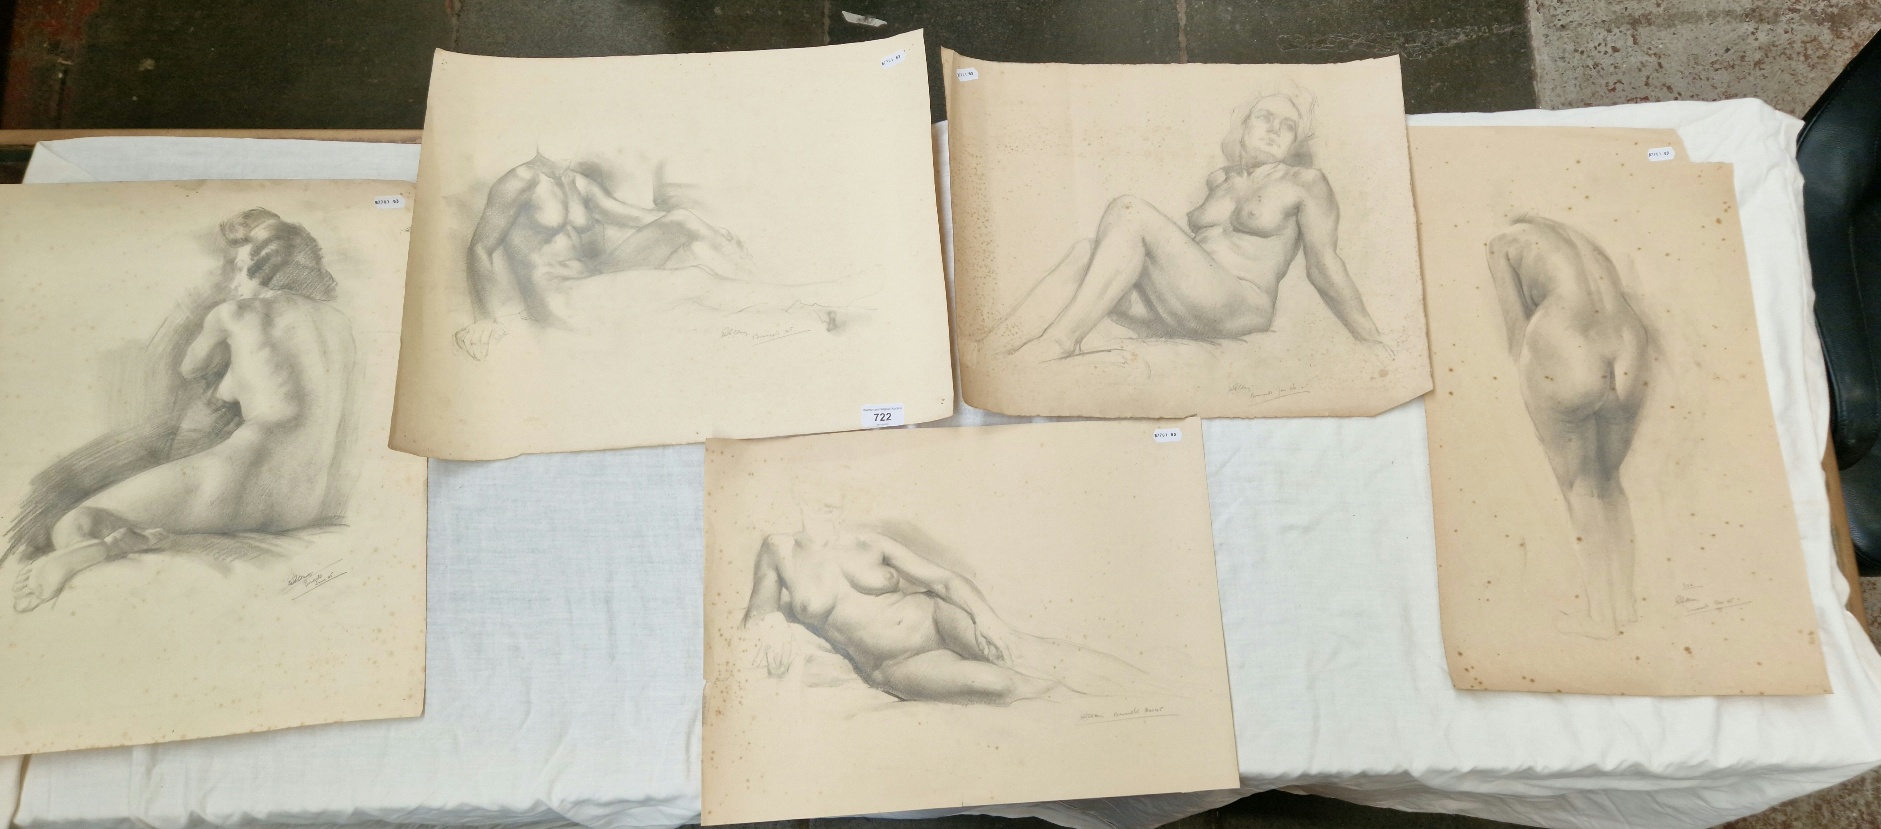 E G Clay (British, 20th century), five nude studies, pencil on paper, each signed 'E.G.Clay...